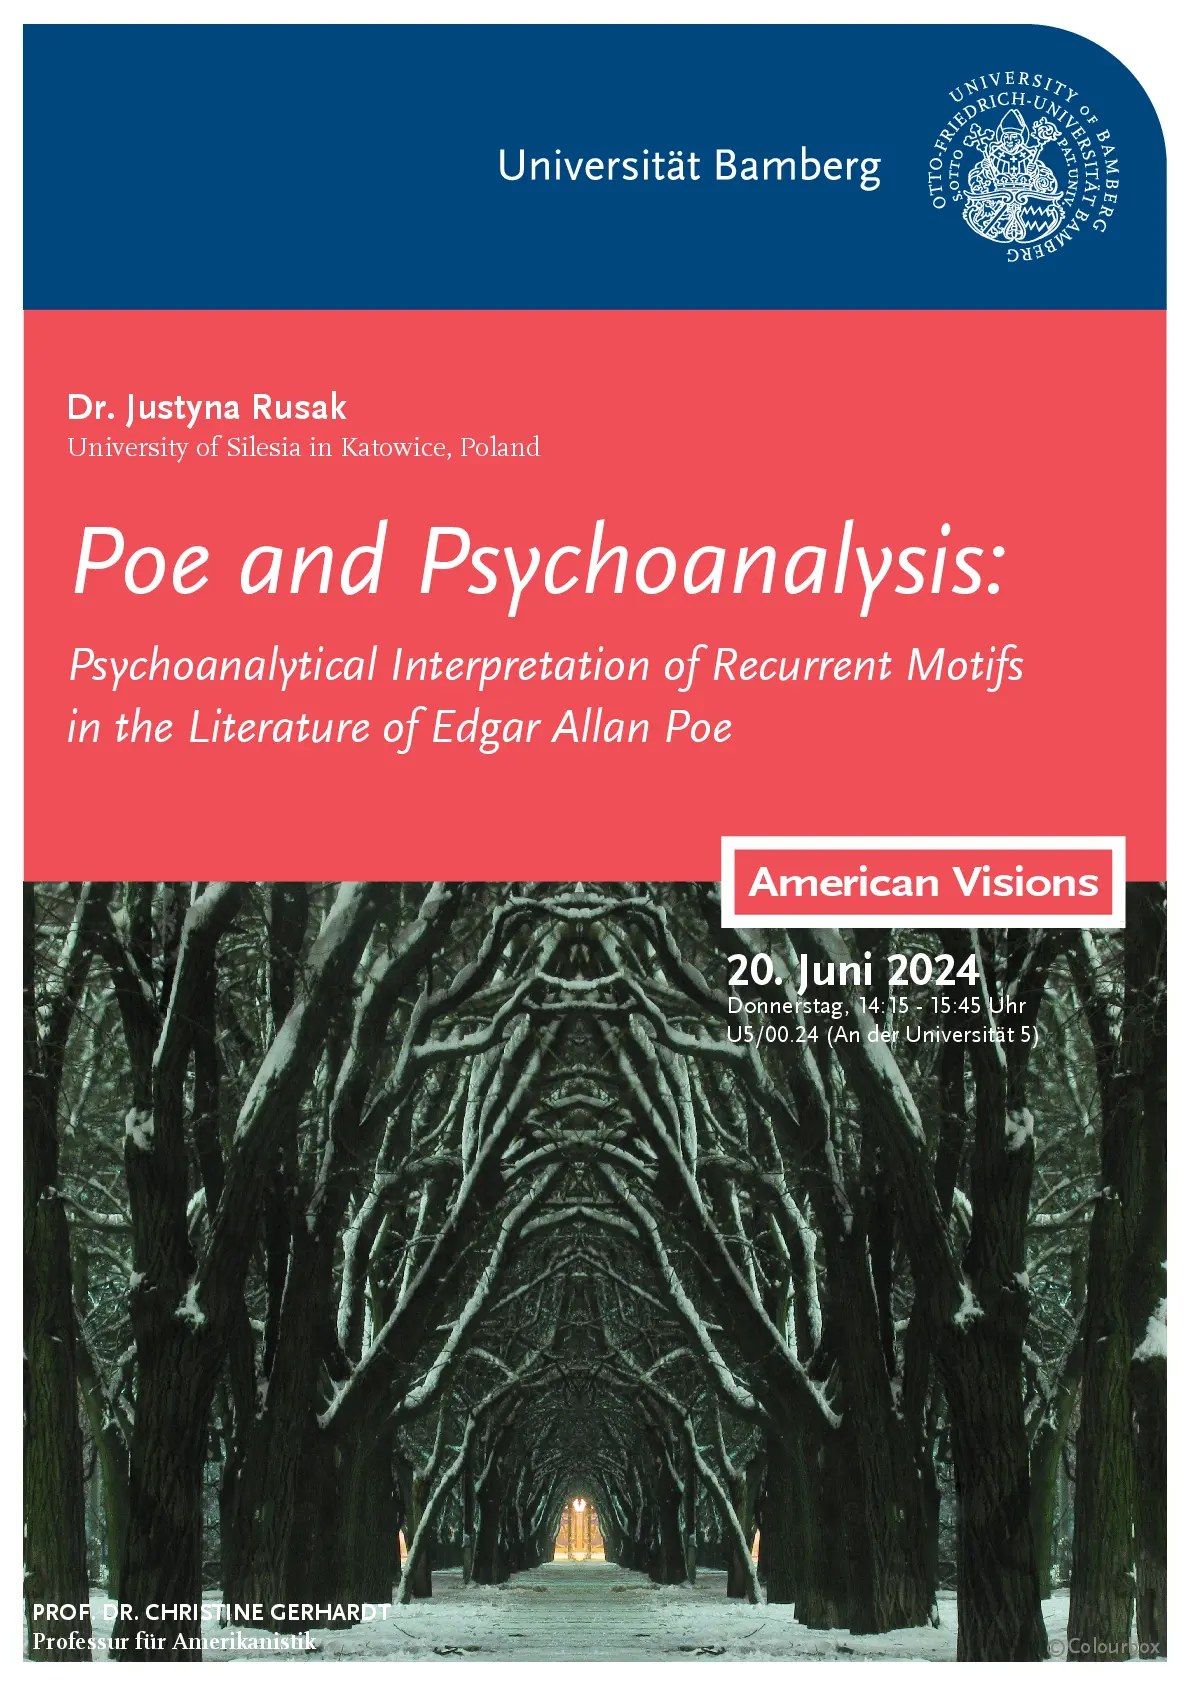 GUEST LECTURE: "Poe and Psychoanalysis" (Justyna Rusak, PhD )